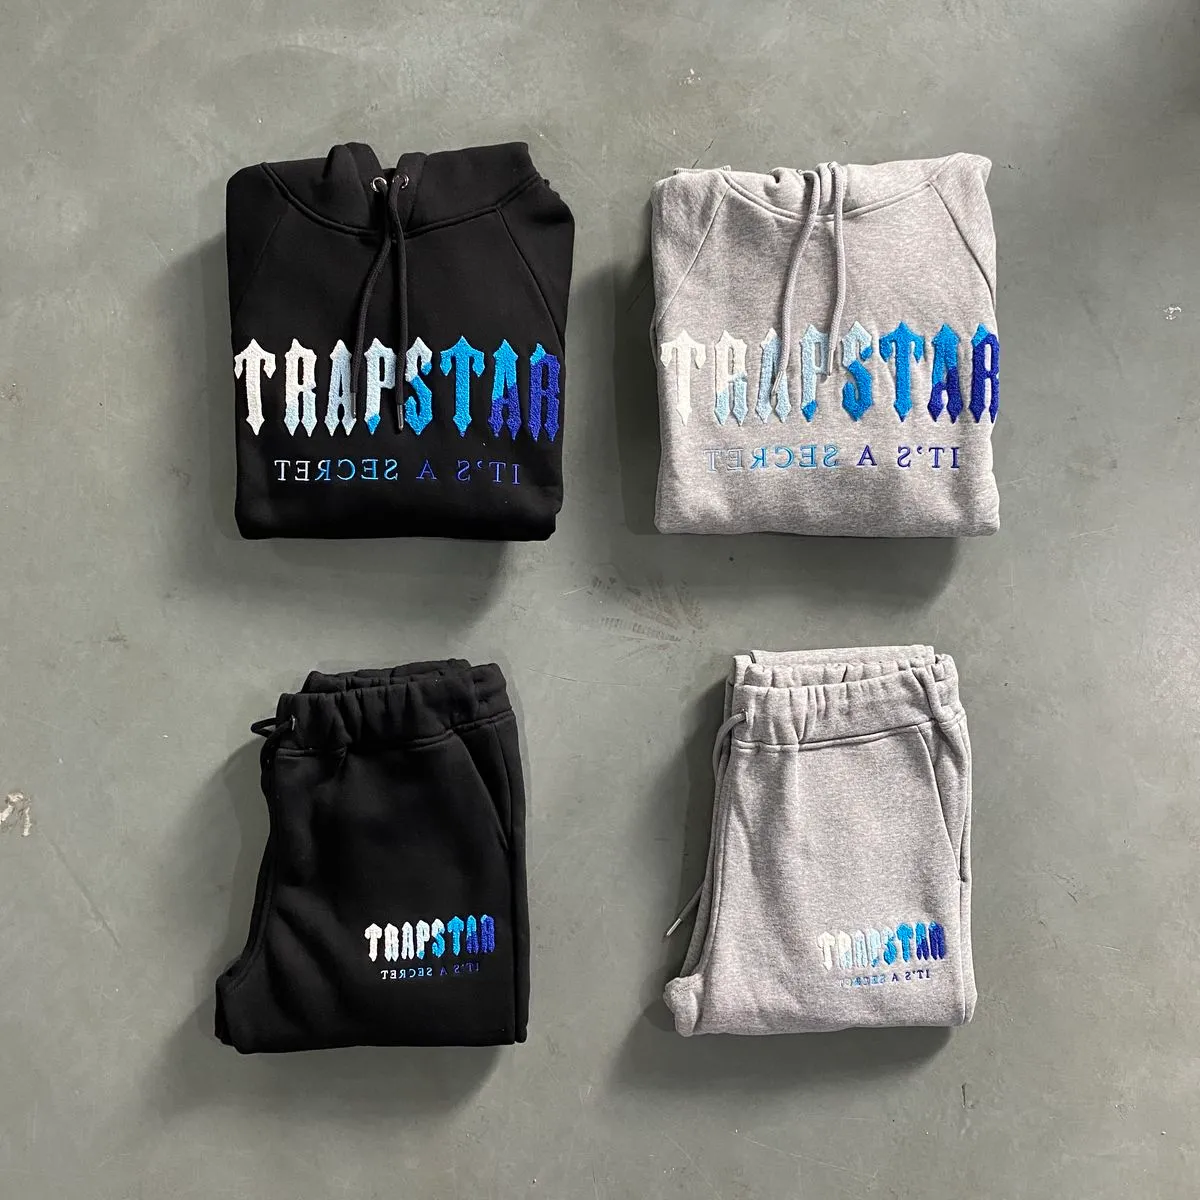 Mens Tracksuits 23ss Men Designer Trapstar Activewear Hoodie Chenille Set Ice Flavours 2.0 Edition 1to1 Top Quality Embroidered Size Xs xxl